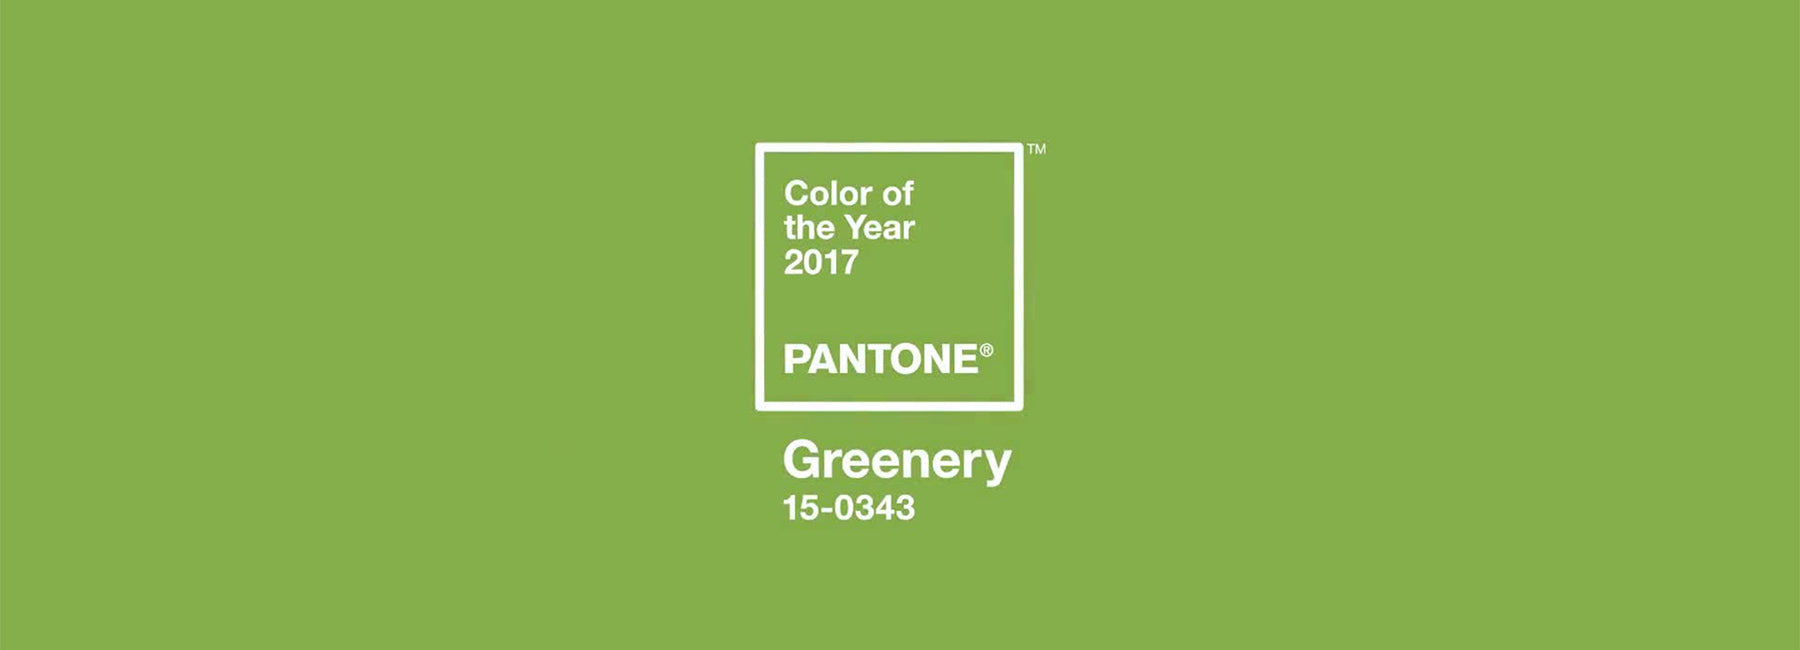 Pantone 2017 Nursery Ideas In Blooming Greenery The Coloring Wallpapers Download Free Images Wallpaper [coloring436.blogspot.com]